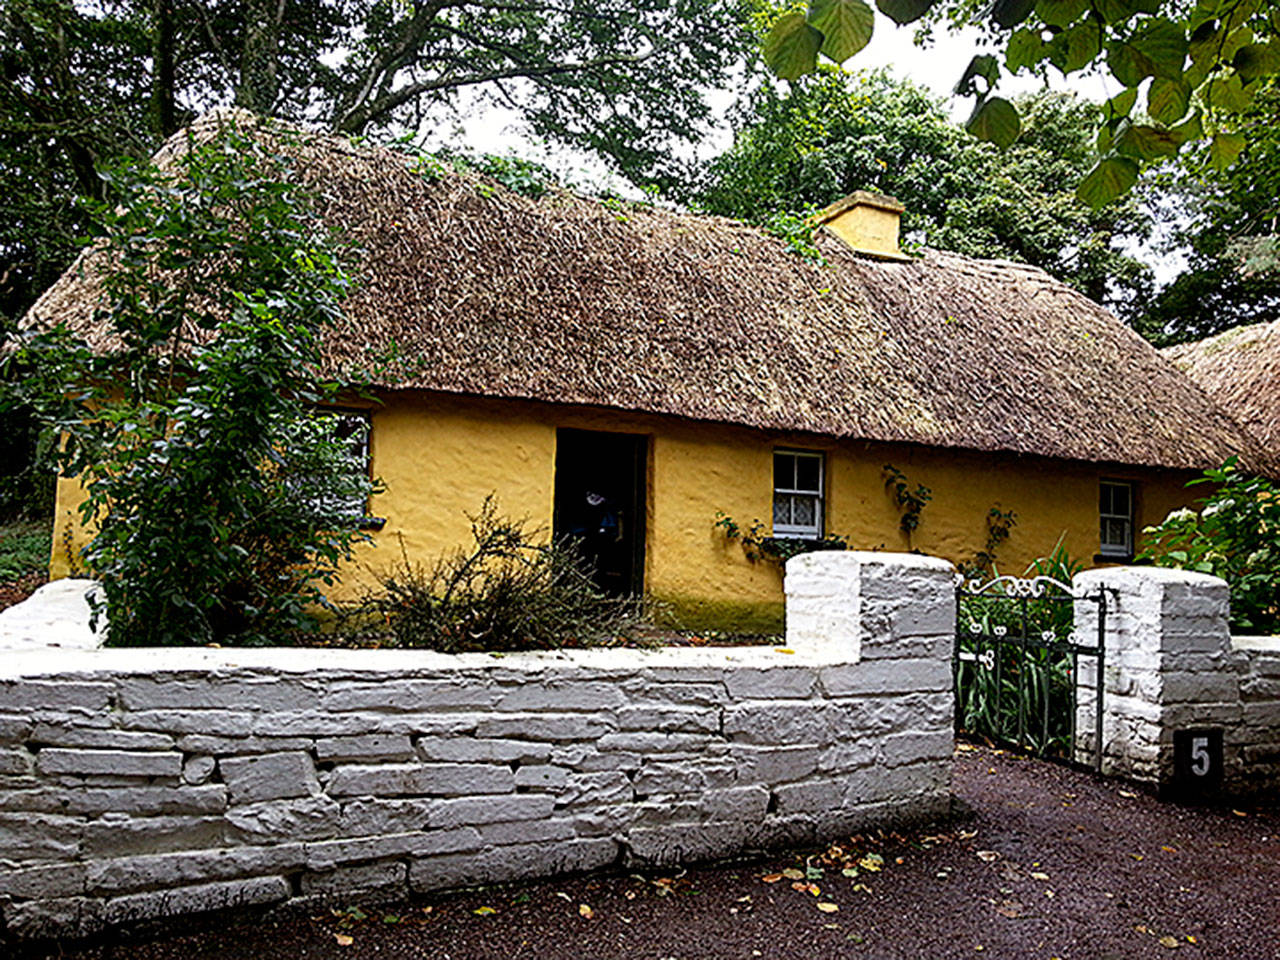 A thatched cottage and garden, like this one in Bunratty, County Clare, is a symbol of Ireland. (Sandra Schumacher photo)